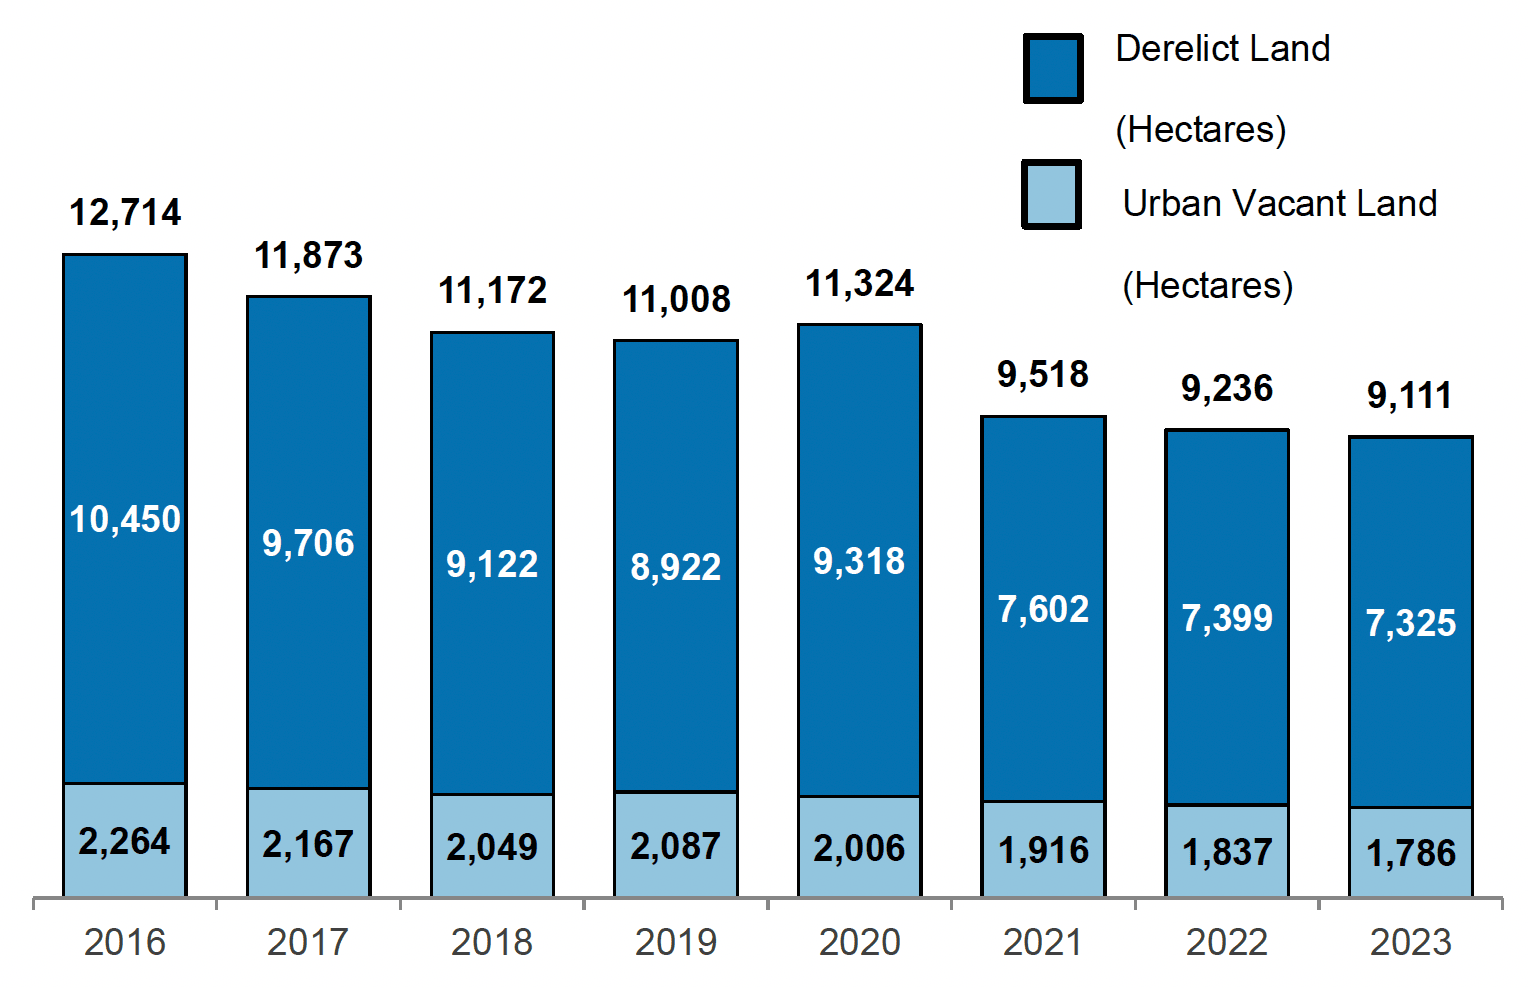 A stacked column chart showing the area of urban vacant land and derelict land in the years 2016 to 2023. There is a gradual downward trend except for derelict land which shows a larger fall in 2021.